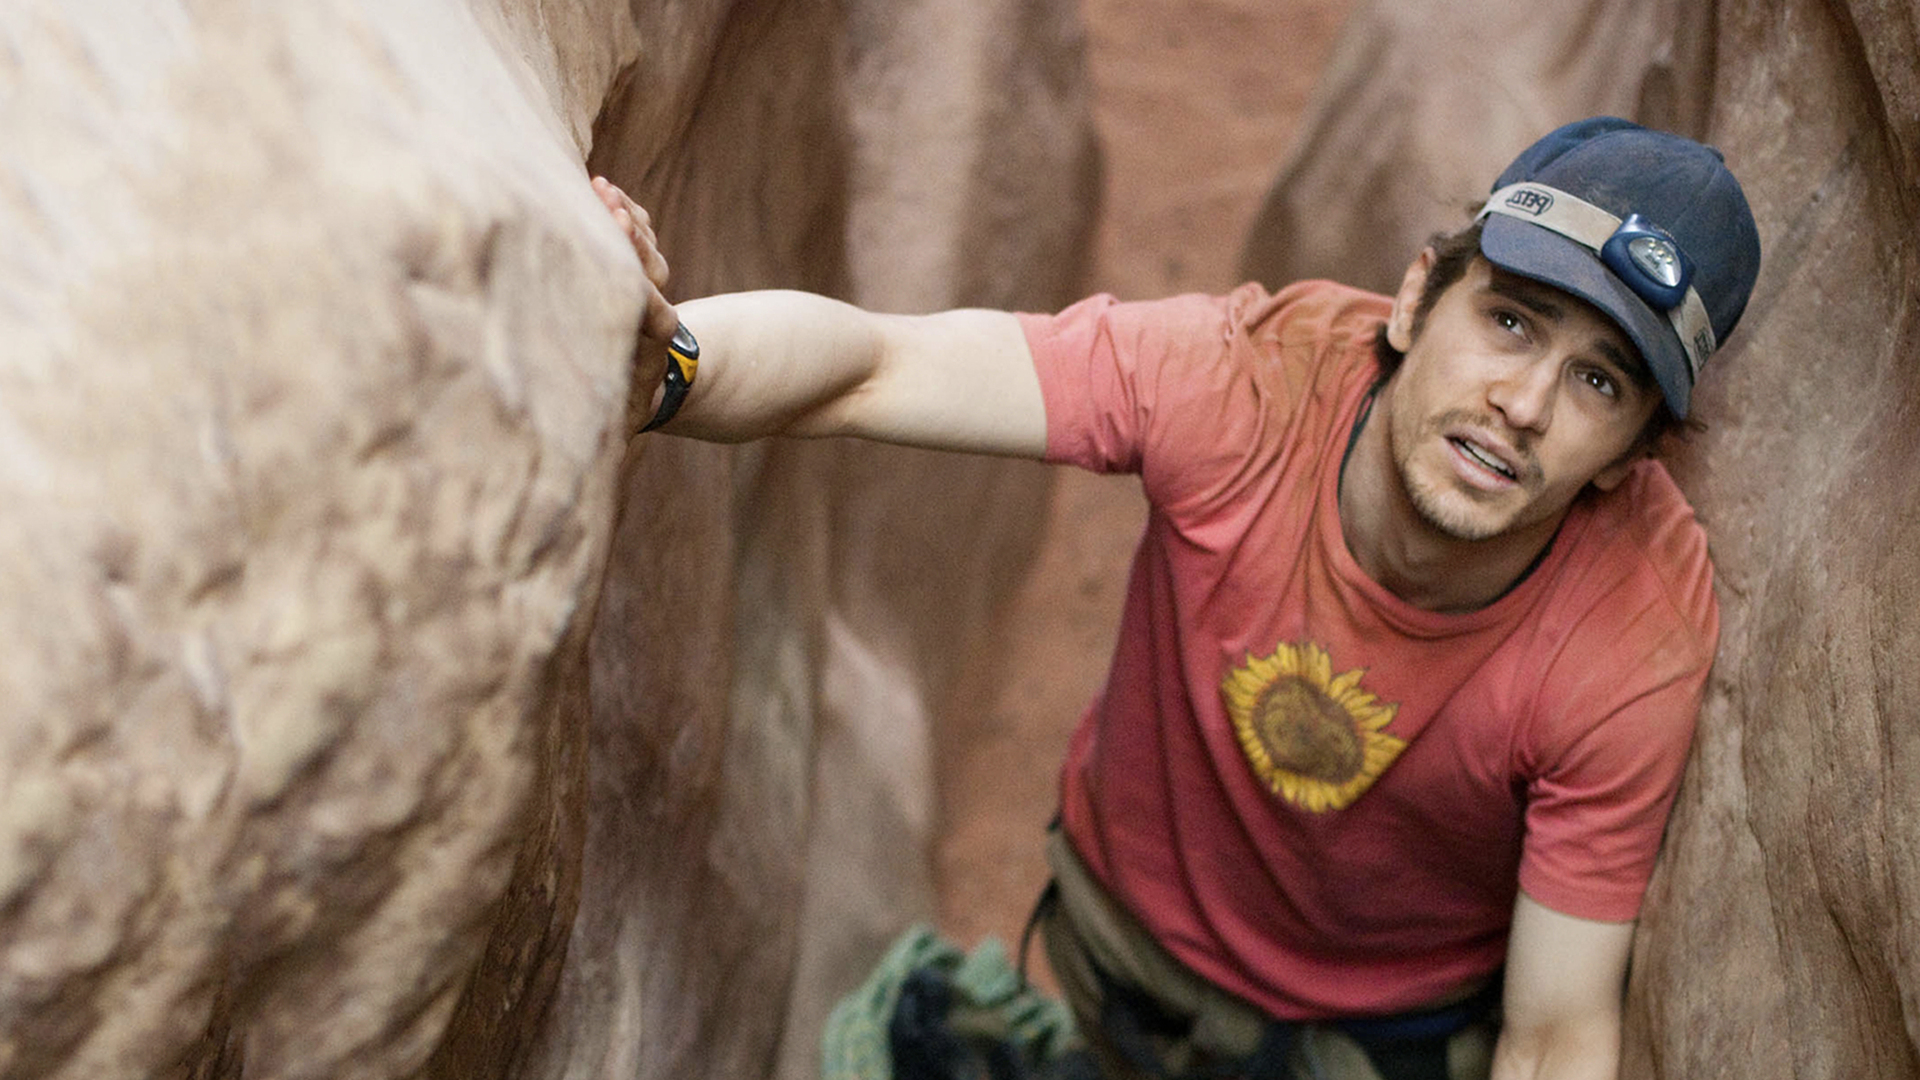 "From Canyon Tragedy to Cinematic Triumph: How '127 Hours' Brought Aron Ralston's Grit to the Big Screen"